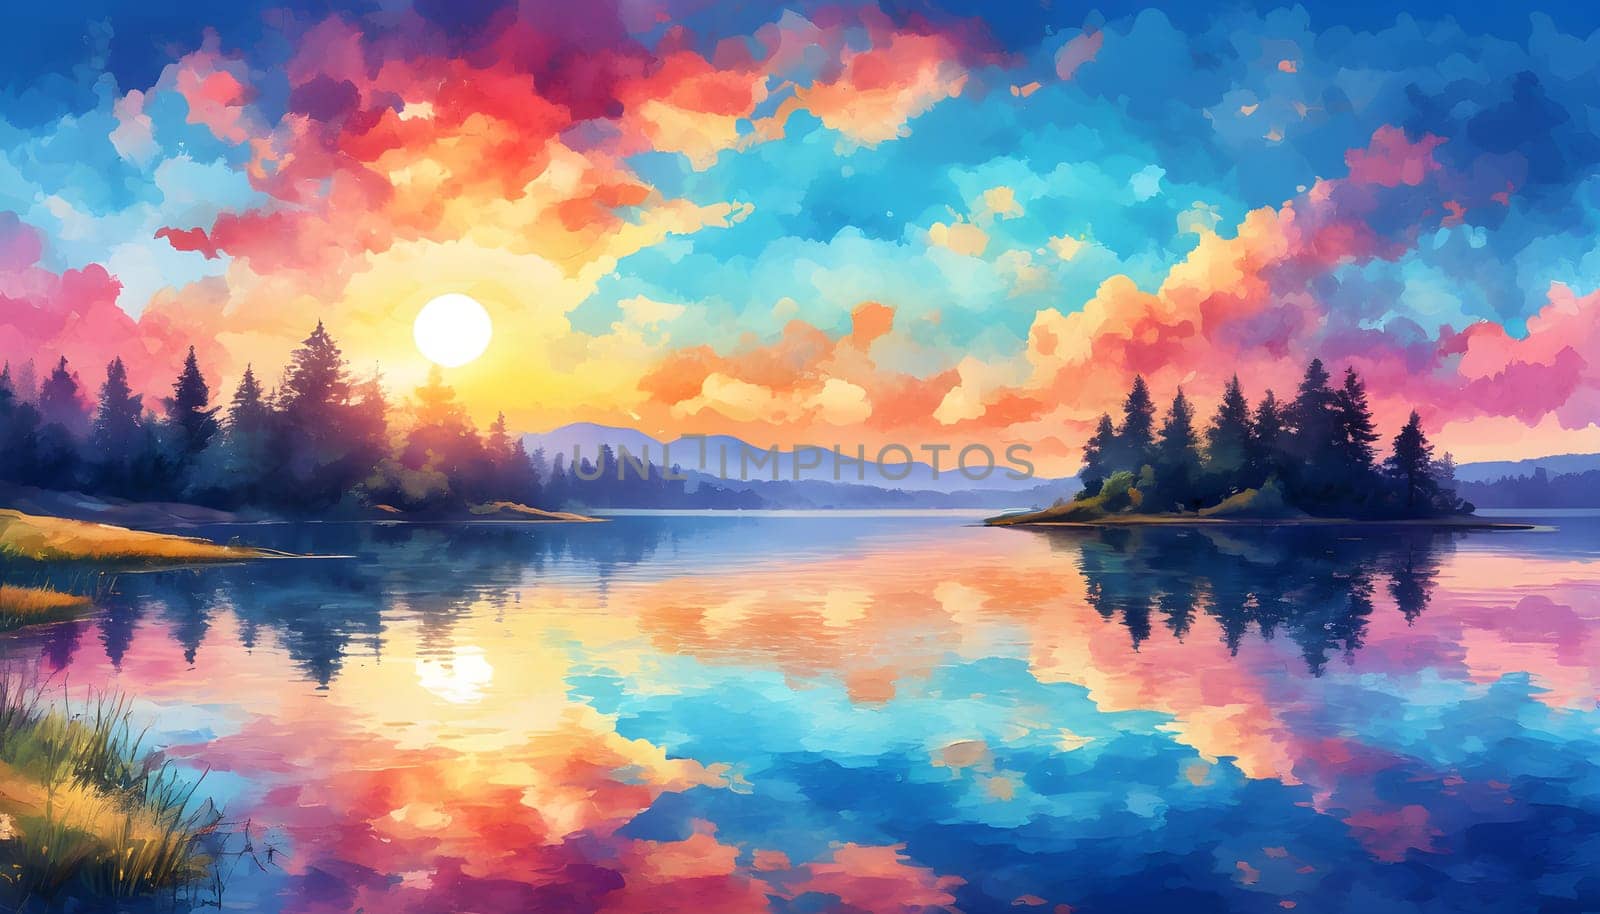 Tranquil Waters: Captivating Sunset by the Lake